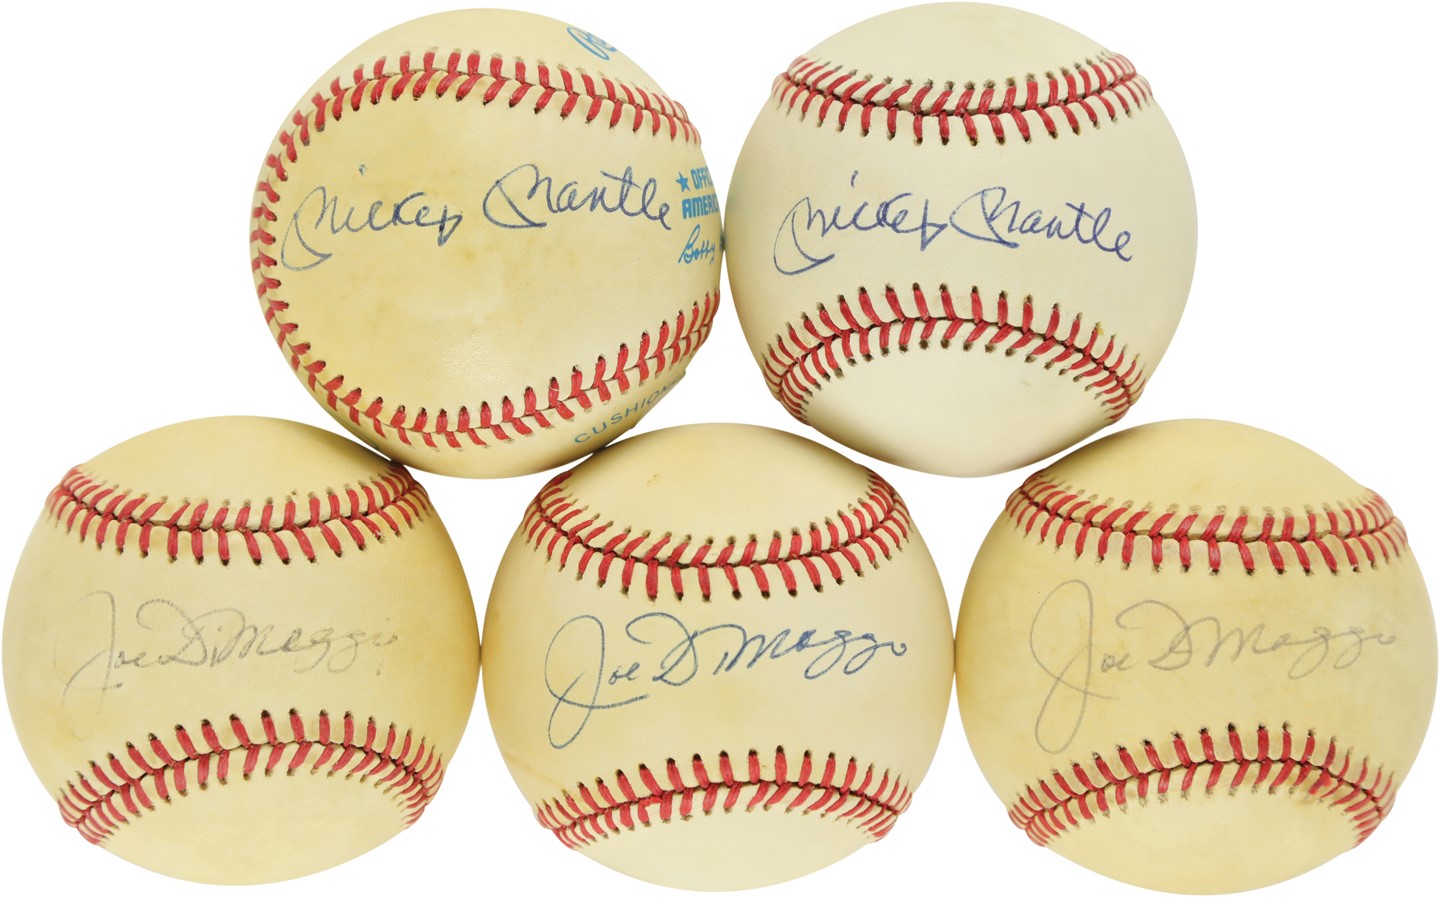 Five Mickey Mantle and Joe DiMaggio Signed Baseballs with One Dual-Signed (All PSA)